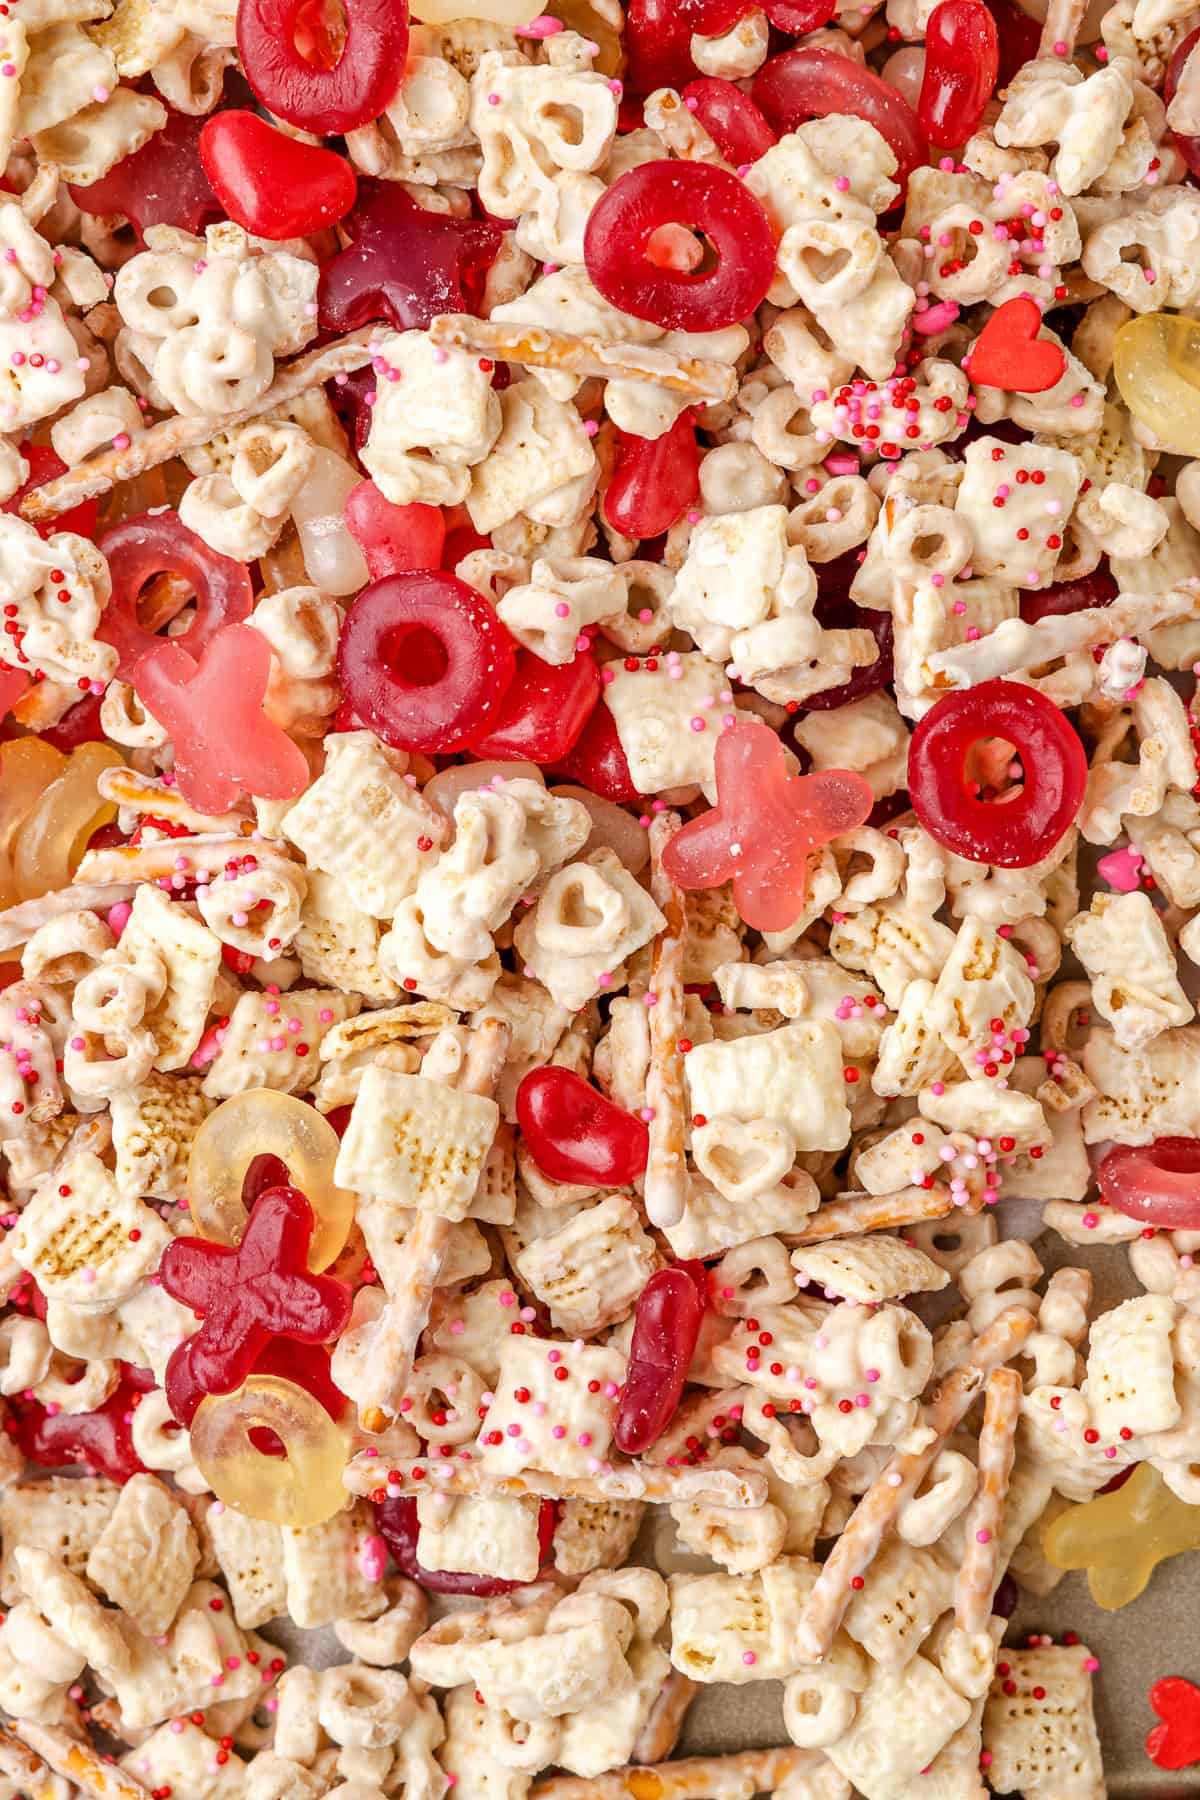 A close image of pink, red, and white Valentine snack mix.